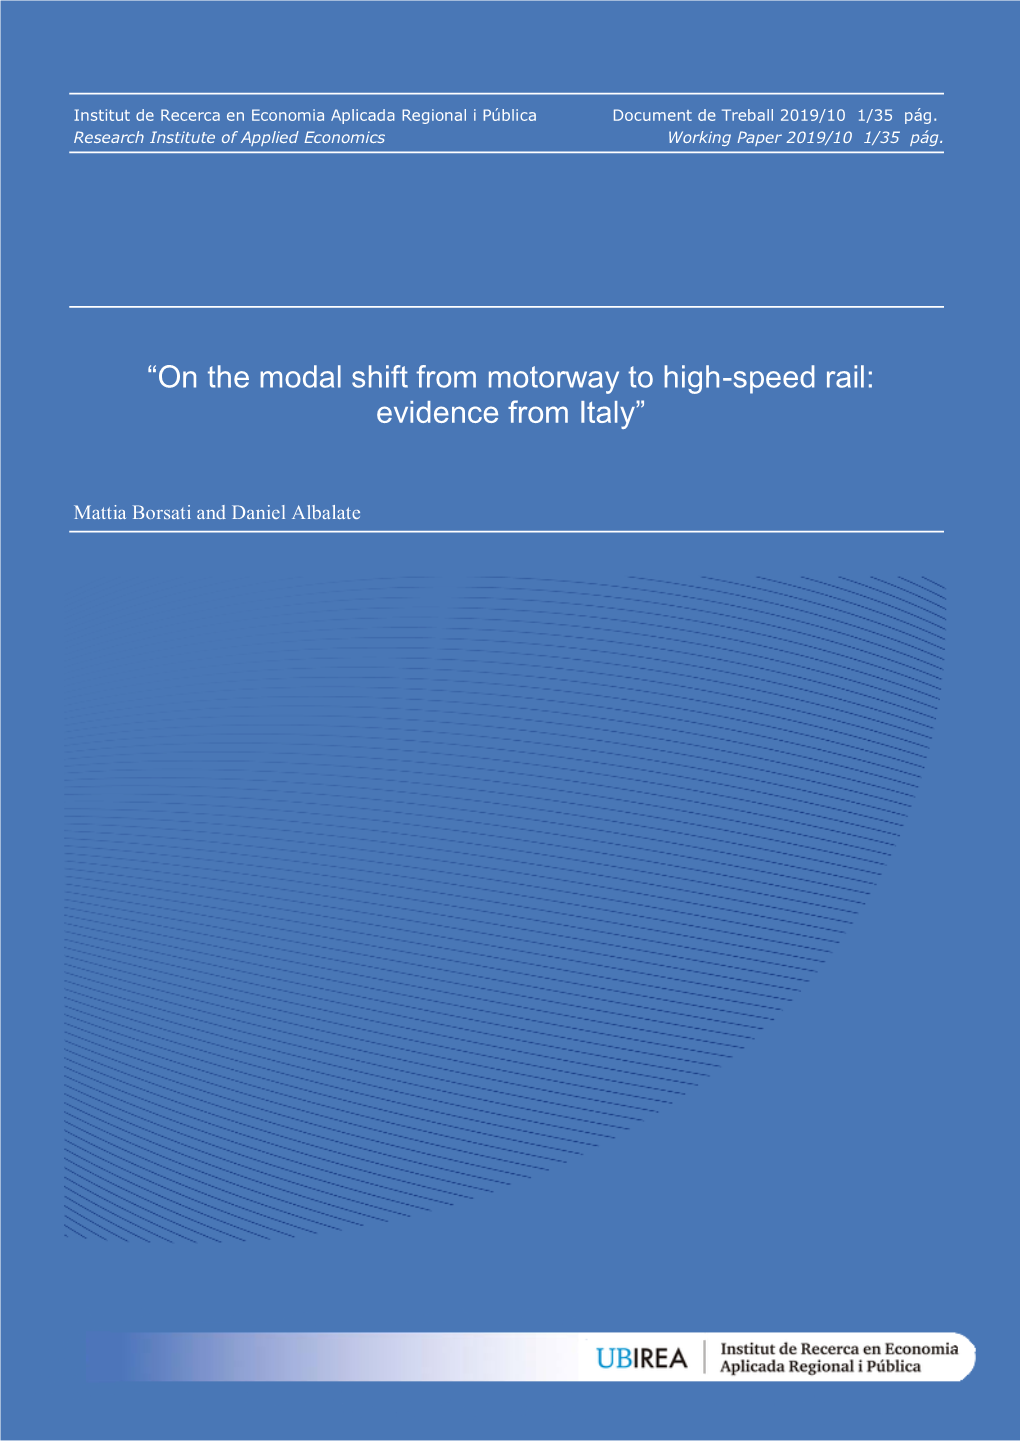 “On the Modal Shift from Motorway to High-Speed Rail: Evidence from Italy”